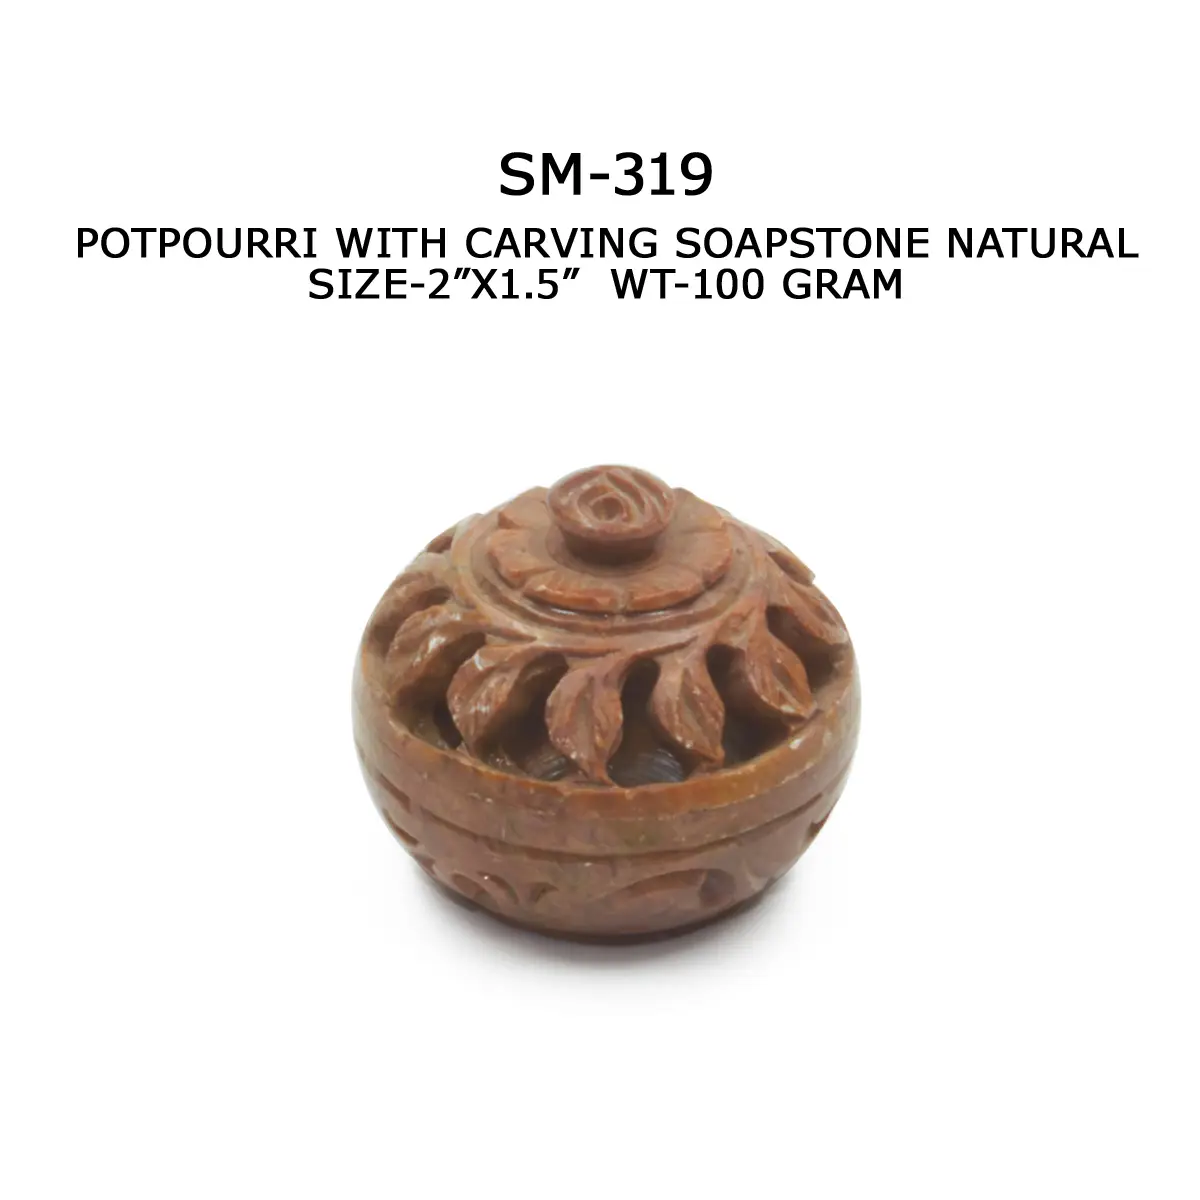 POTPOURRI WITH CARVING SOAPSTONE